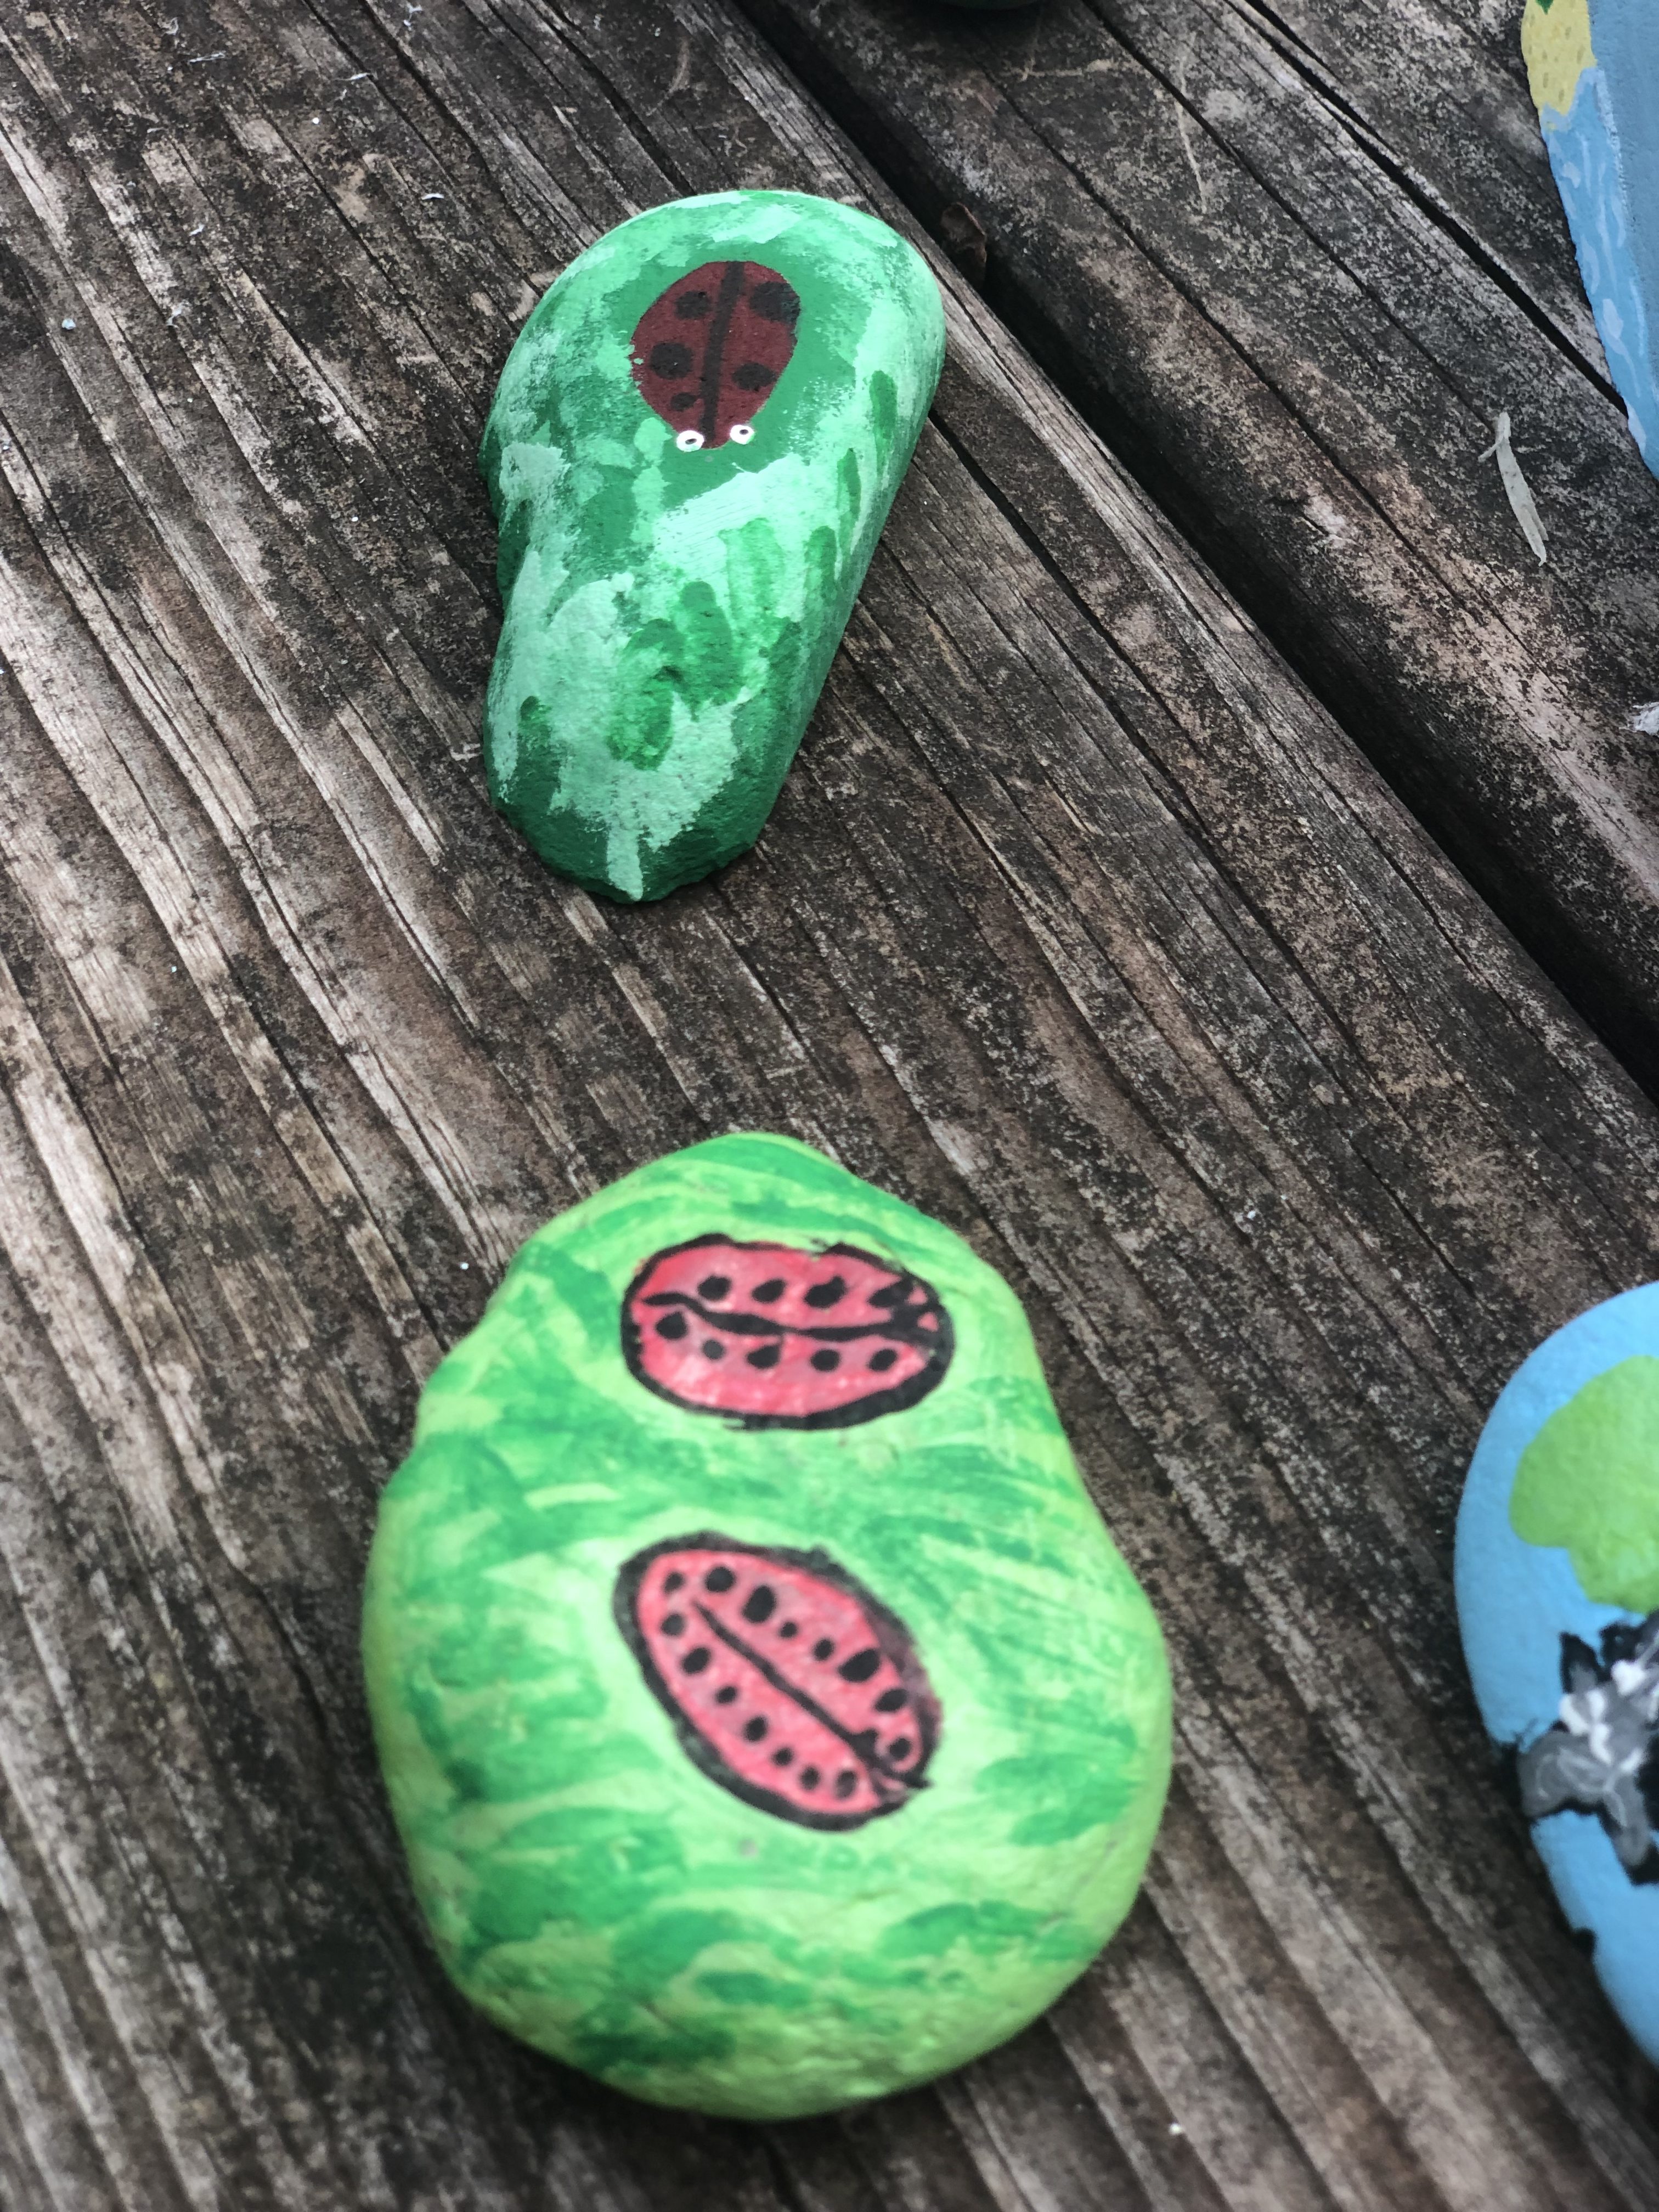 Looking for a fun and easy Father's Day craft. With these rocks, you get to tell Dad just how special he is. Make "My Dad Rocks" rocks and see how much he smiles. It is an easy and inexpensive Father's Day gift kids can make themselves. 